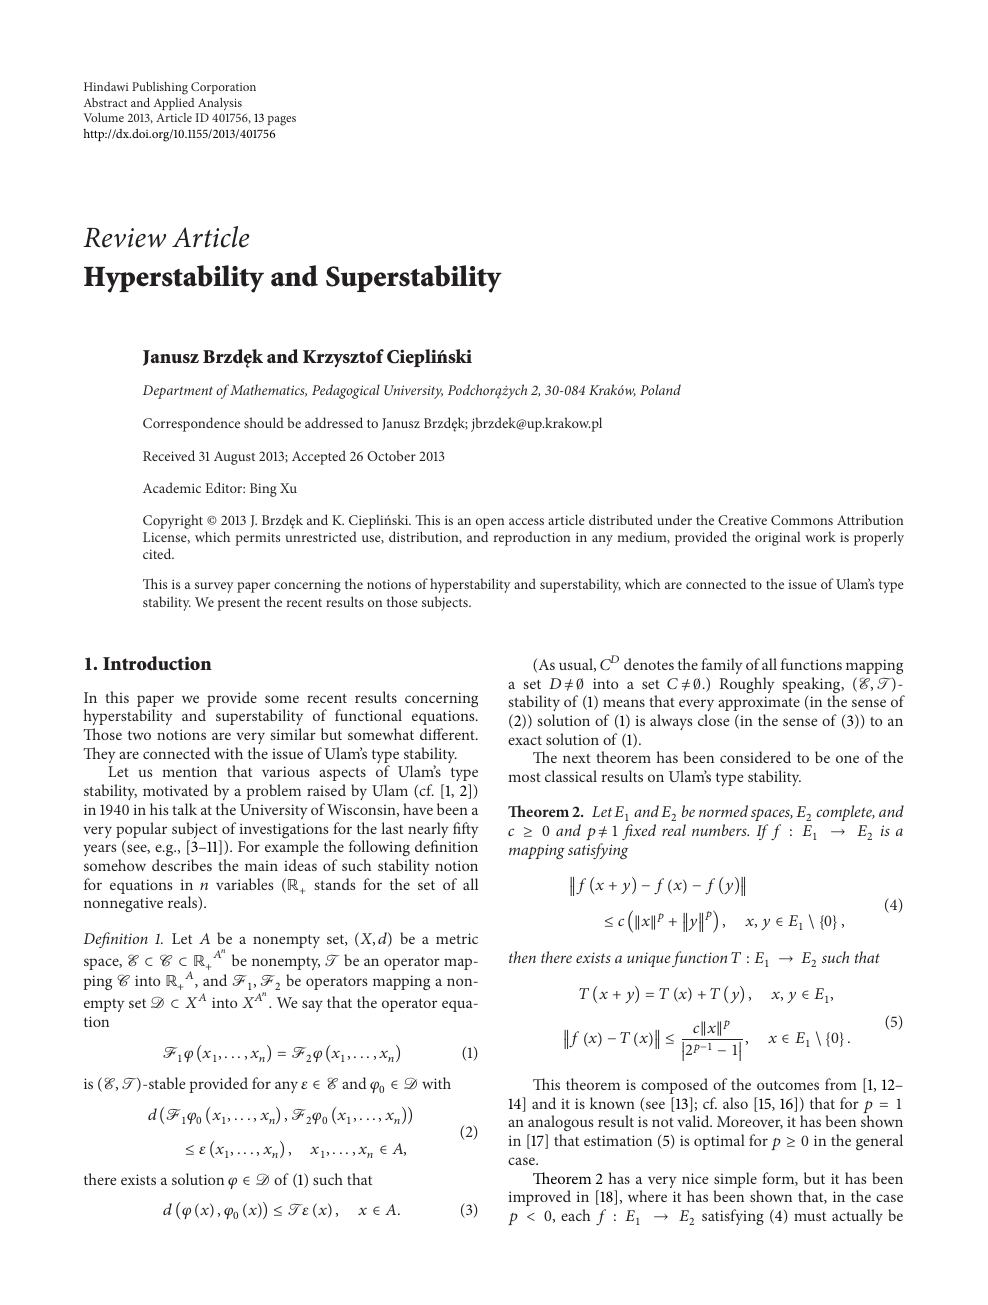 Hyperstability And Superstability Topic Of Research Paper In Mathematics Download Scholarly Article Pdf And Read For Free On Cyberleninka Open Science Hub